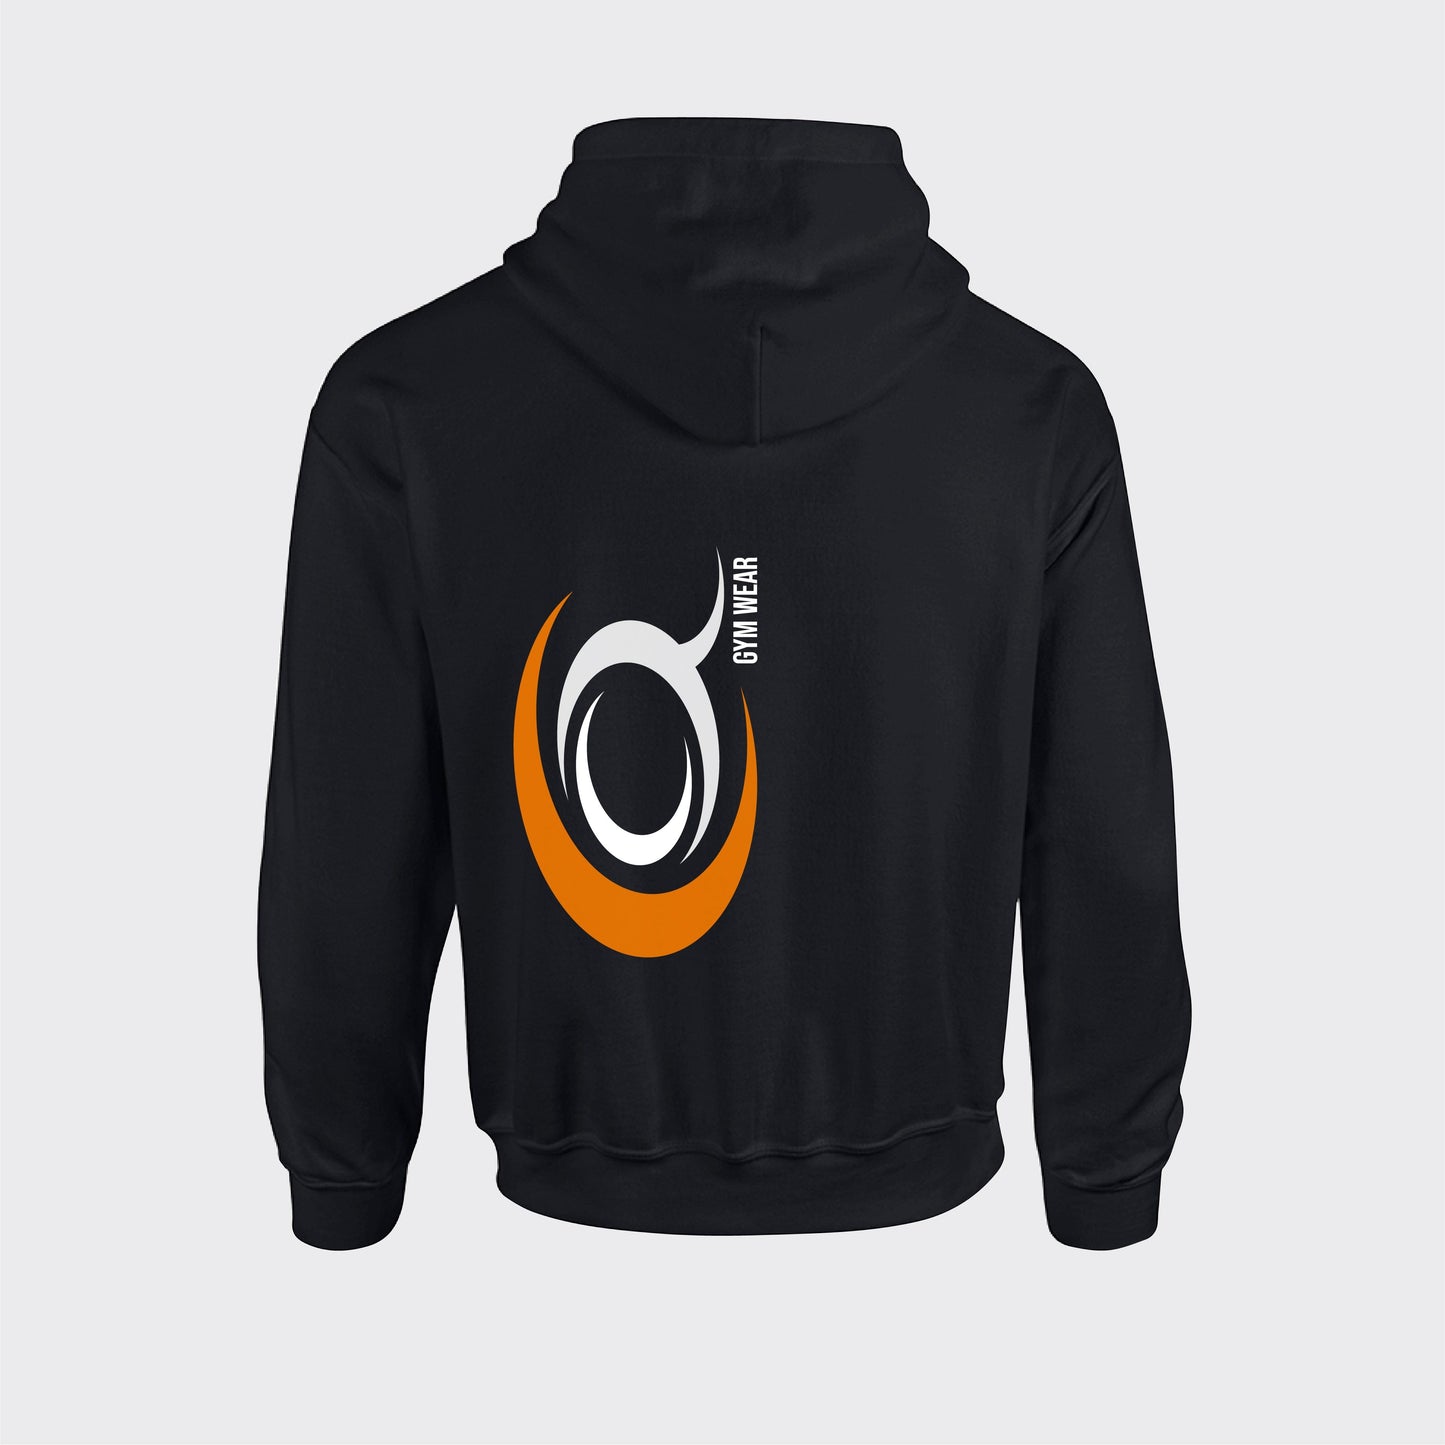 OG Hoodie: Controlled Aggression